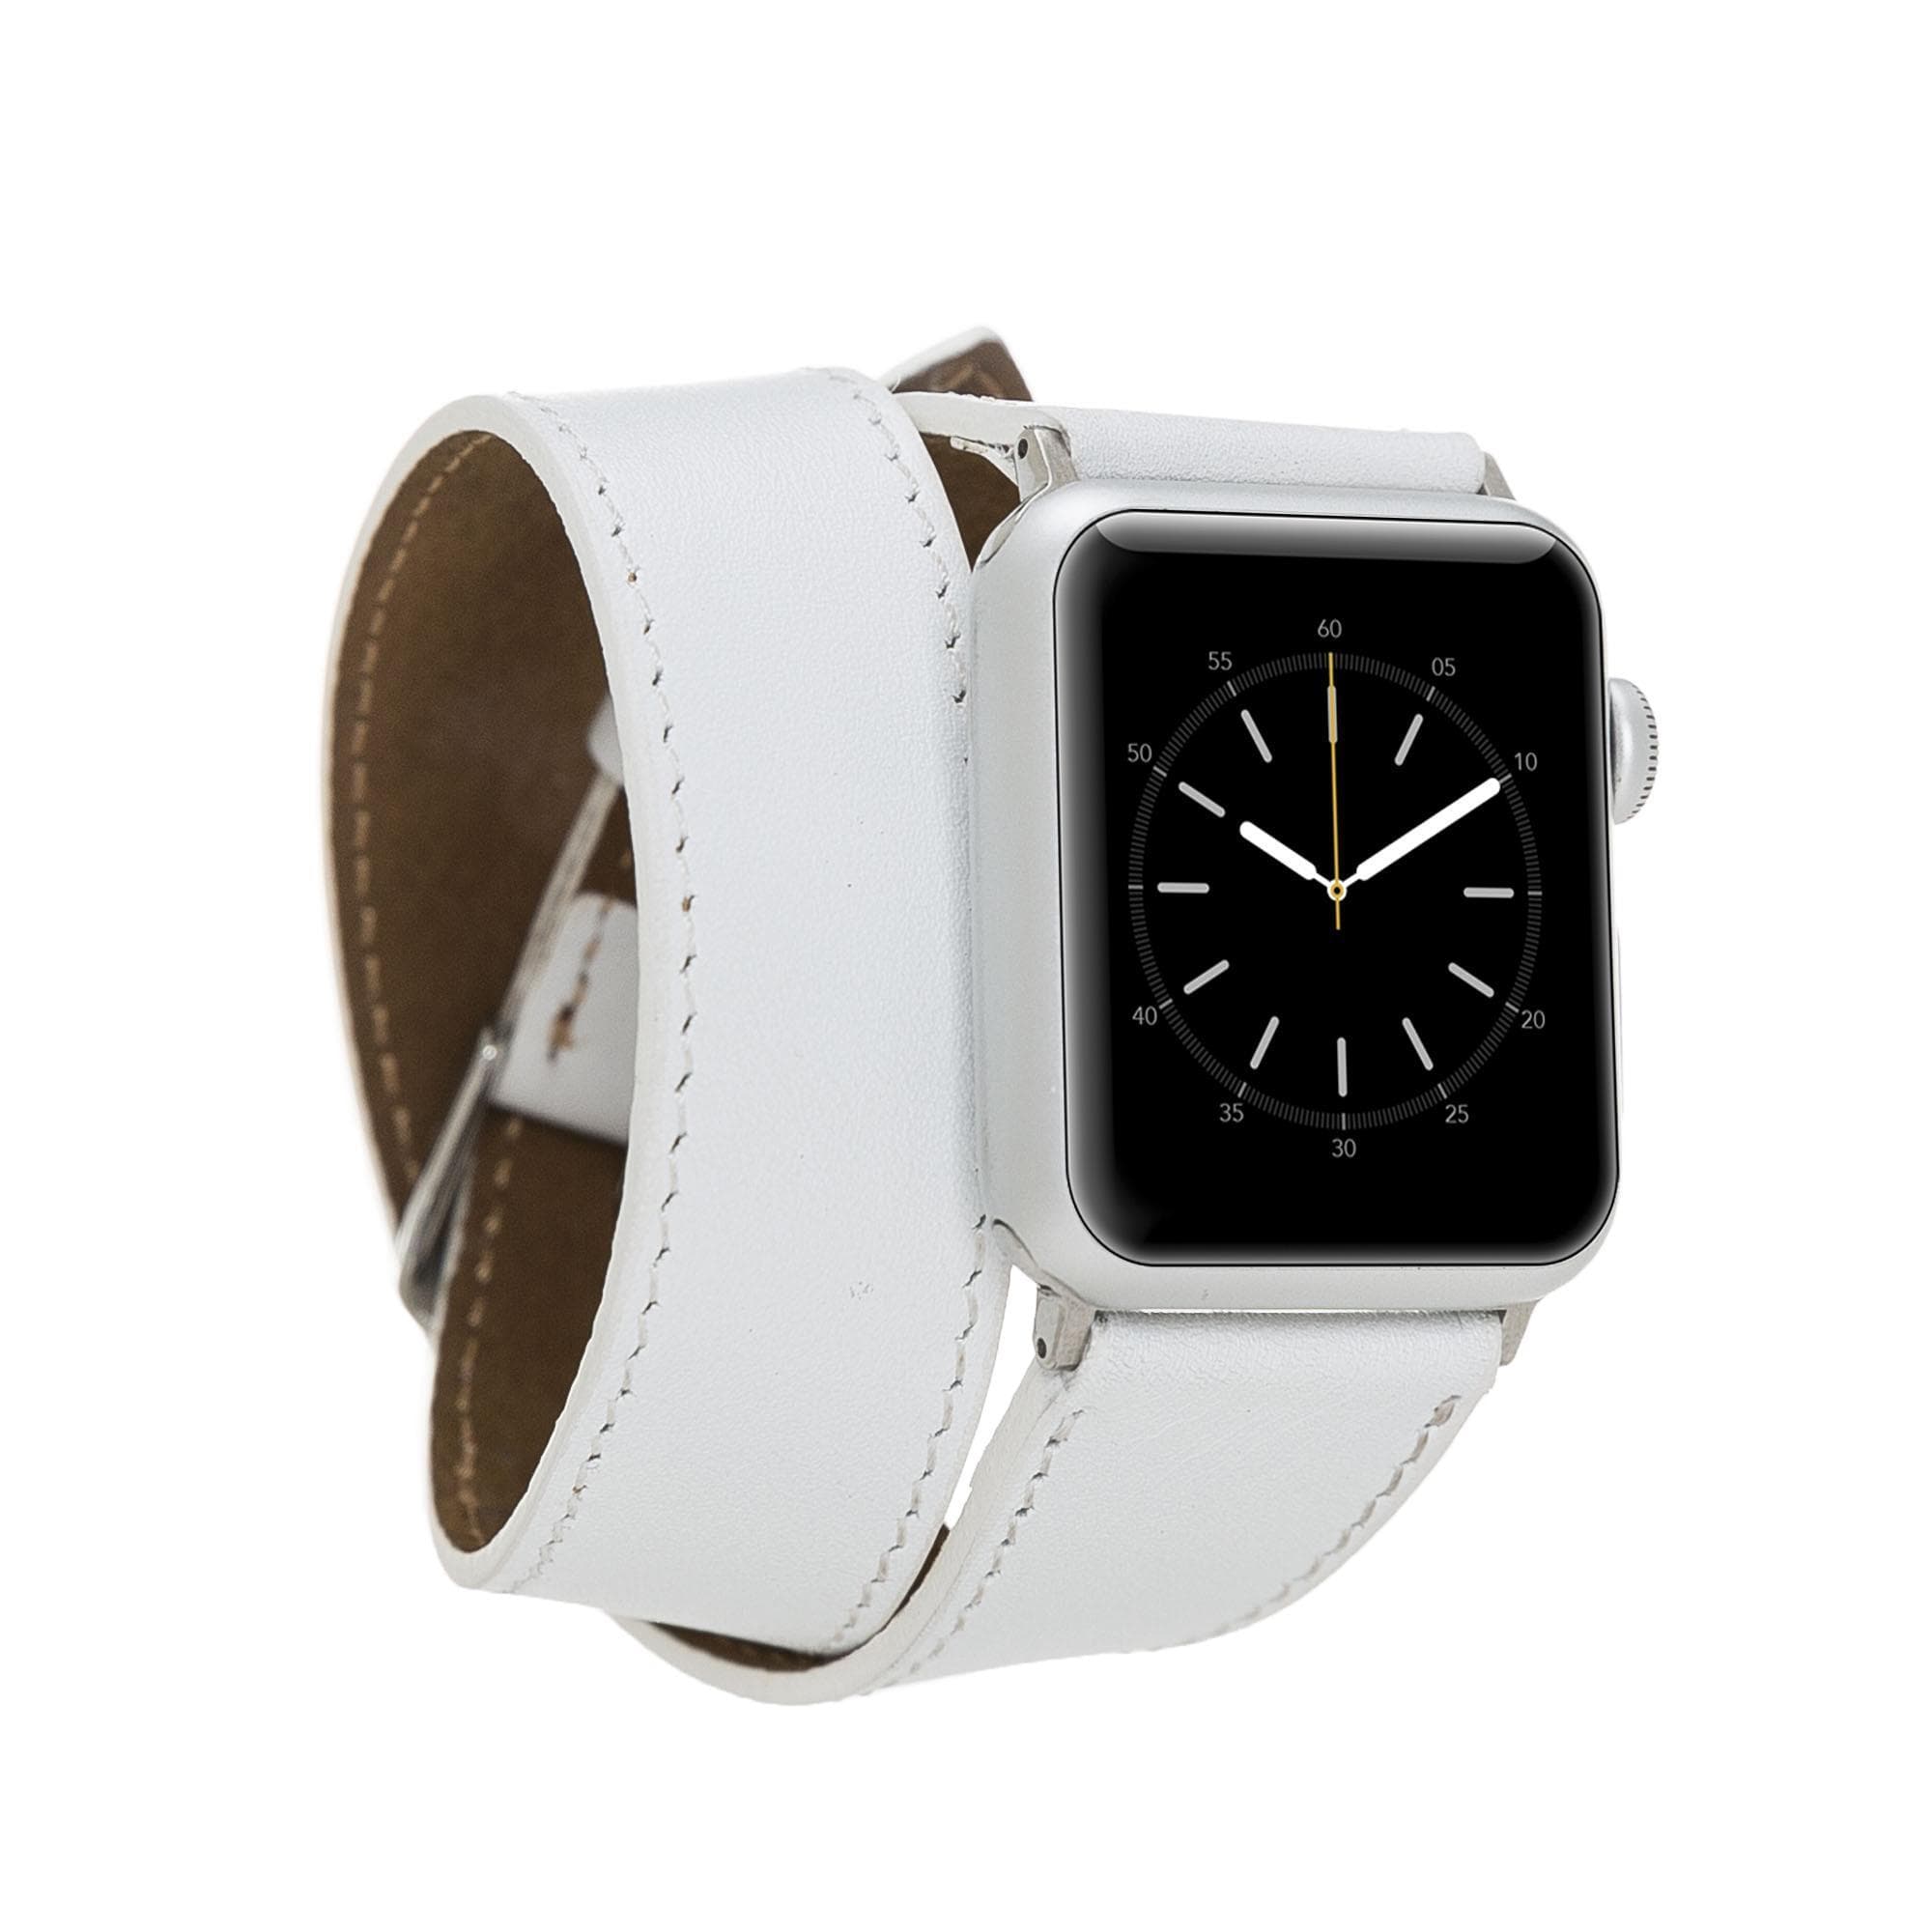 B2B - Leather Apple Watch Bands - DT Double Tour Style F3 Bomonti